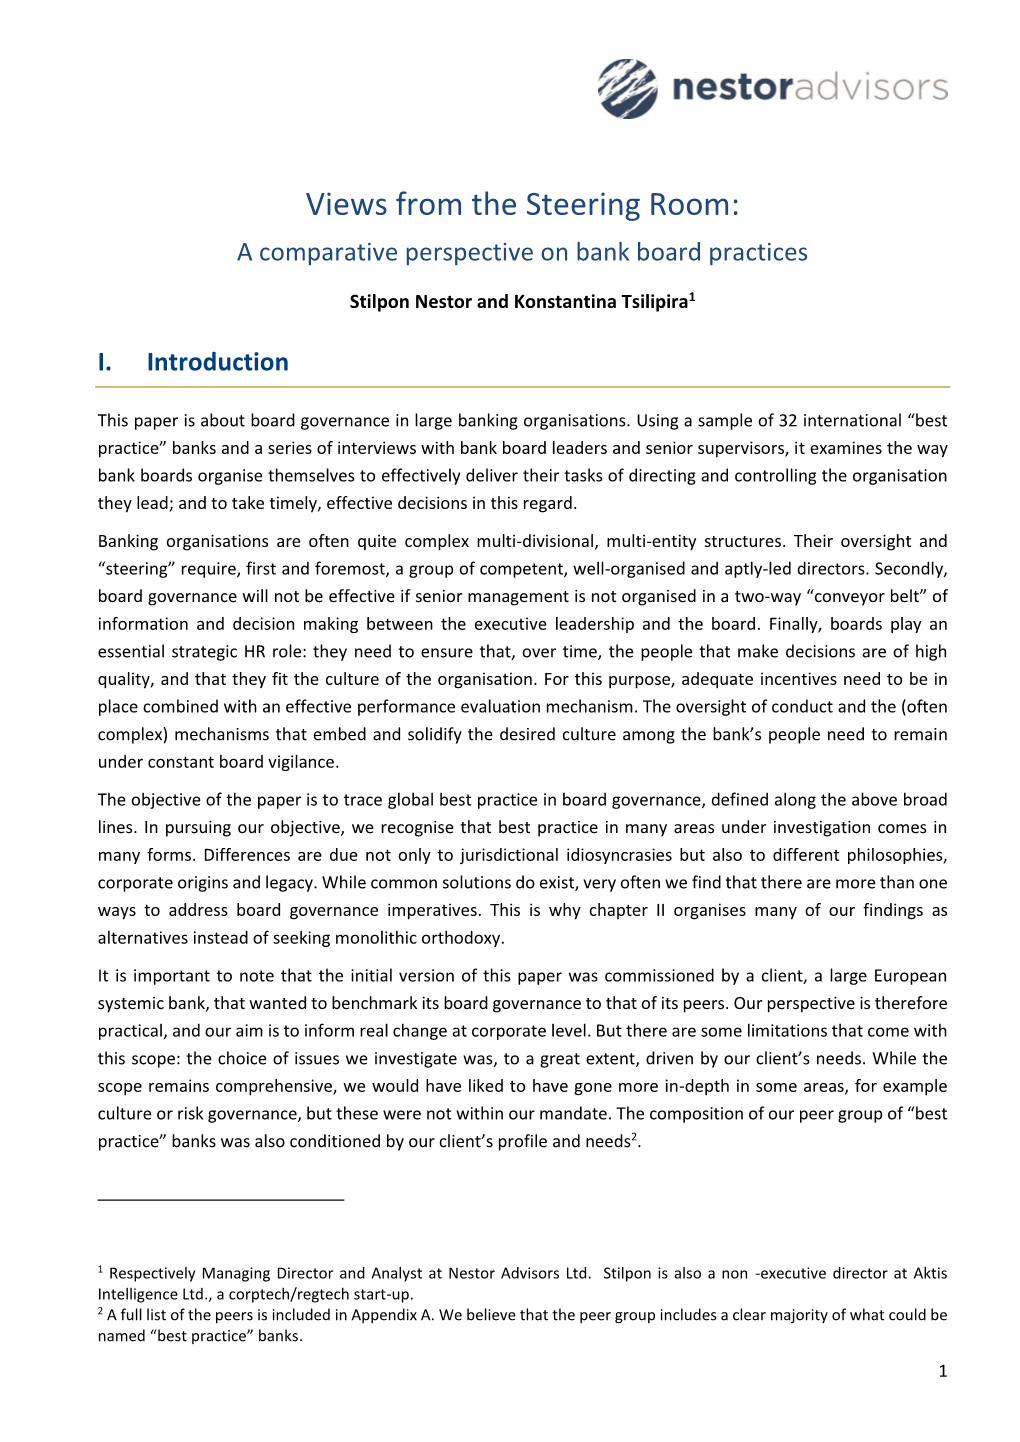 Views from the Steering Room: a Comparative Perspective on Bank Board Practices